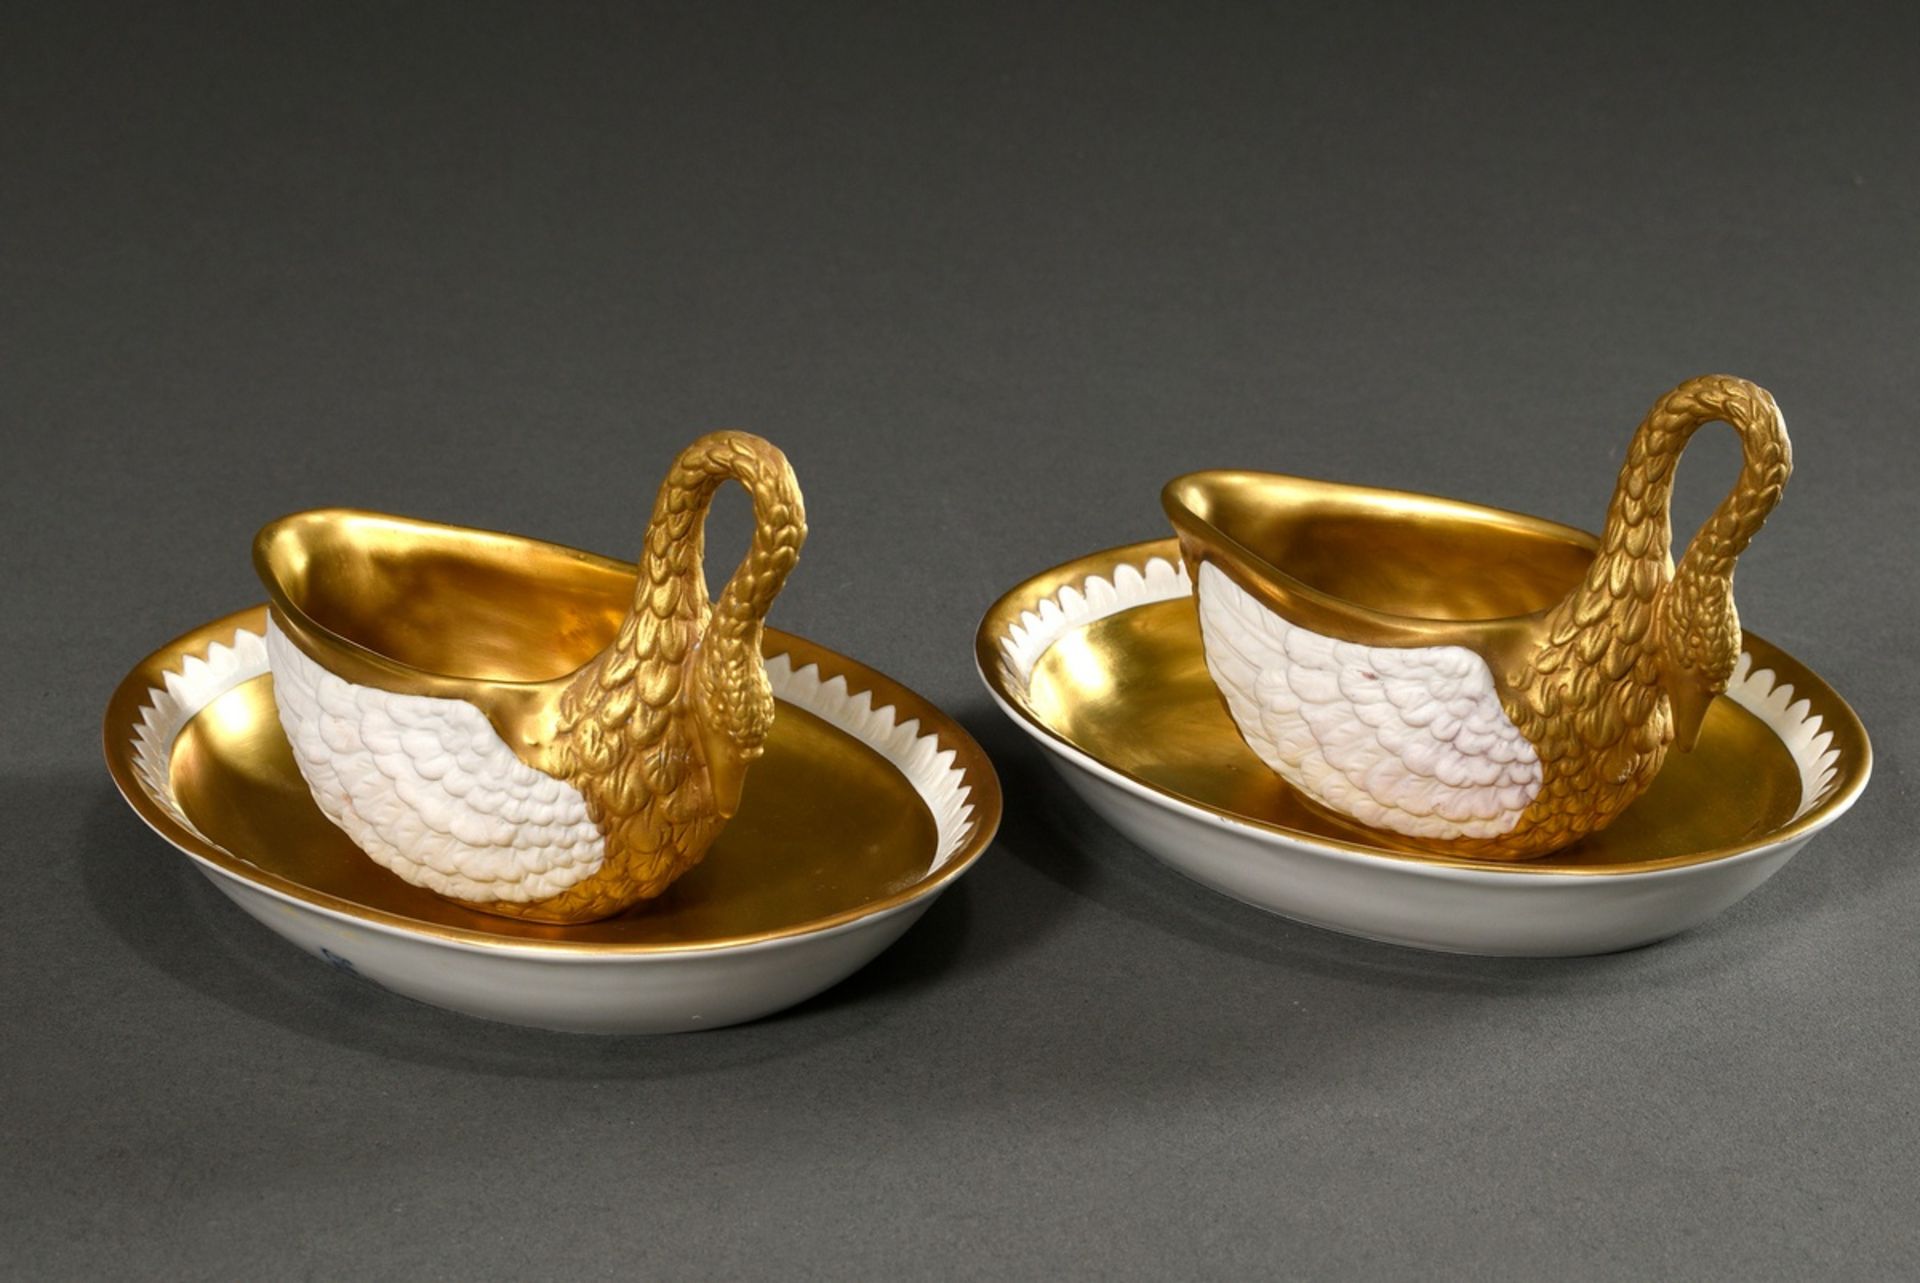 Pair of Dresden porcelain cups/UT "Swan" with rich gilding, molding no.: 6709, year: 1987/1988, bos - Image 5 of 7